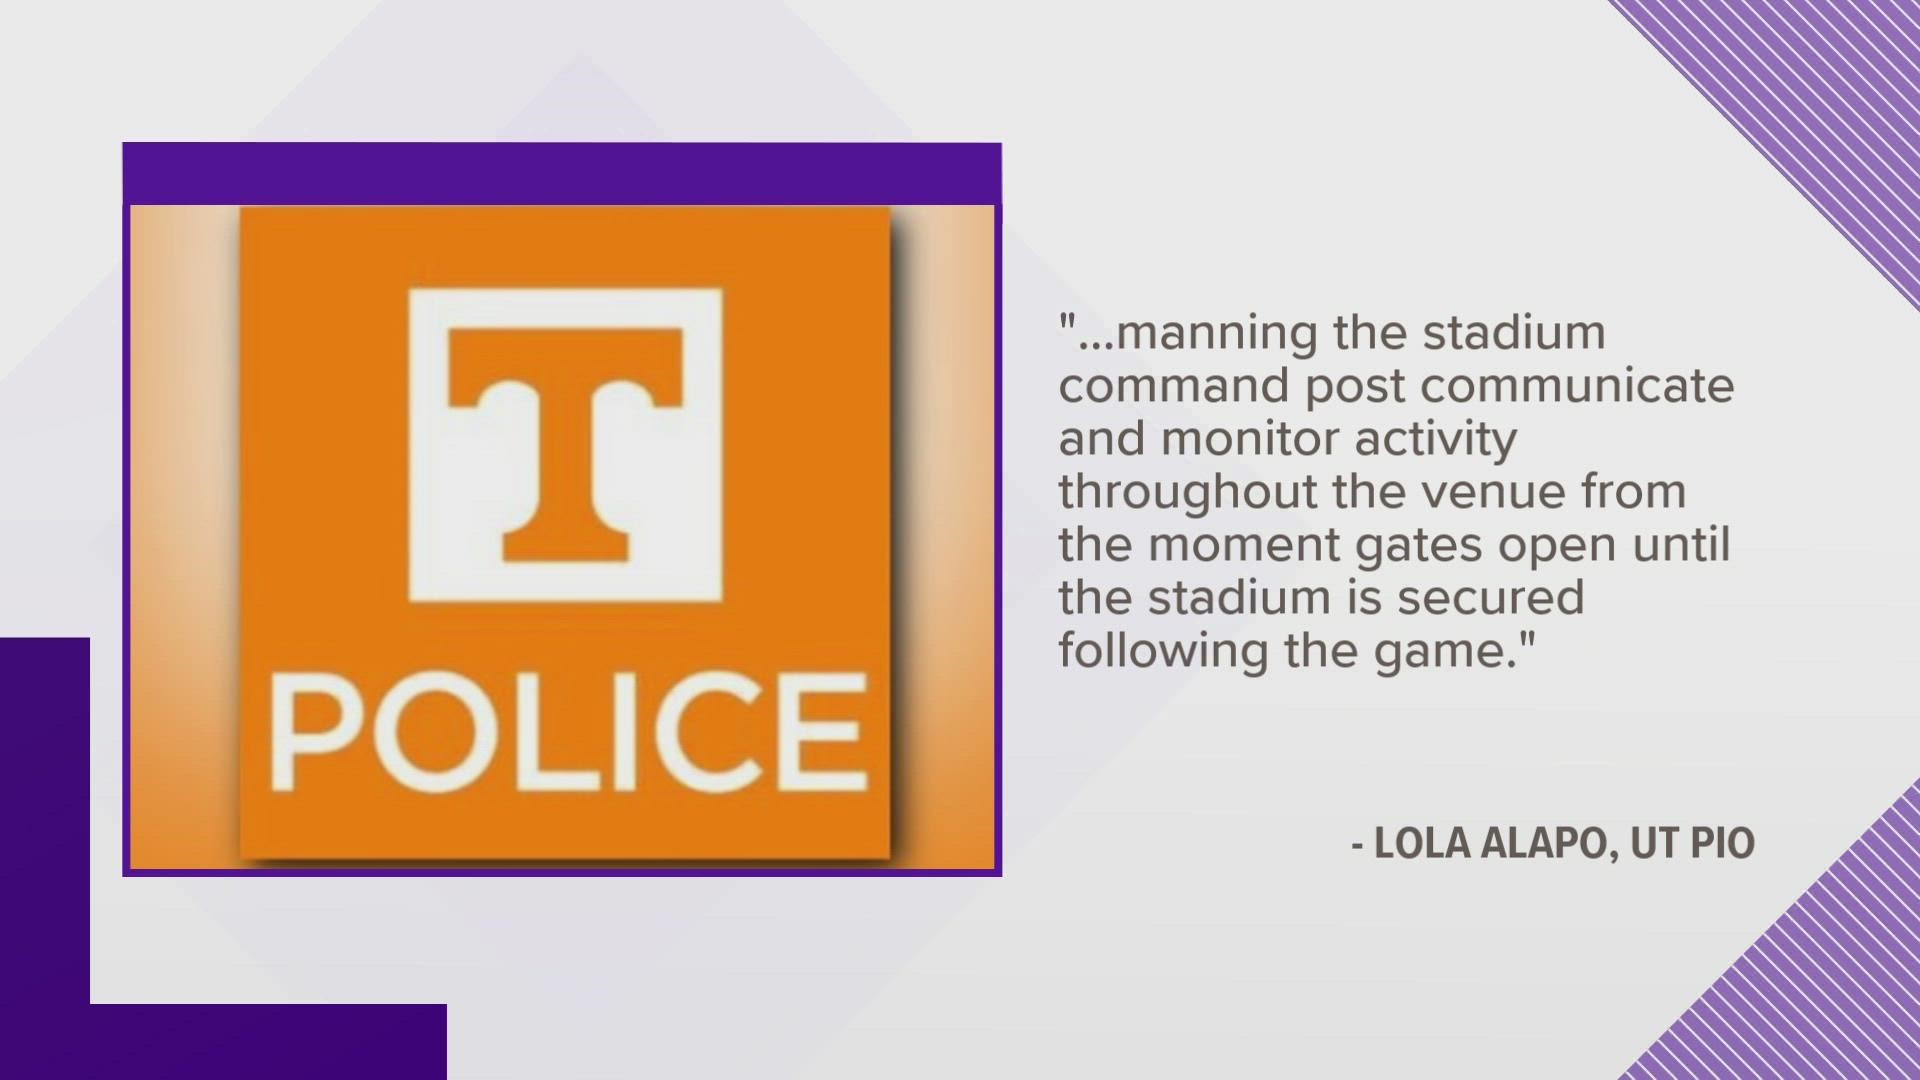 UT police are reminding fans to follow safety protocols. They will have event staff, law enforcement and security personnel present throughout the stadium.